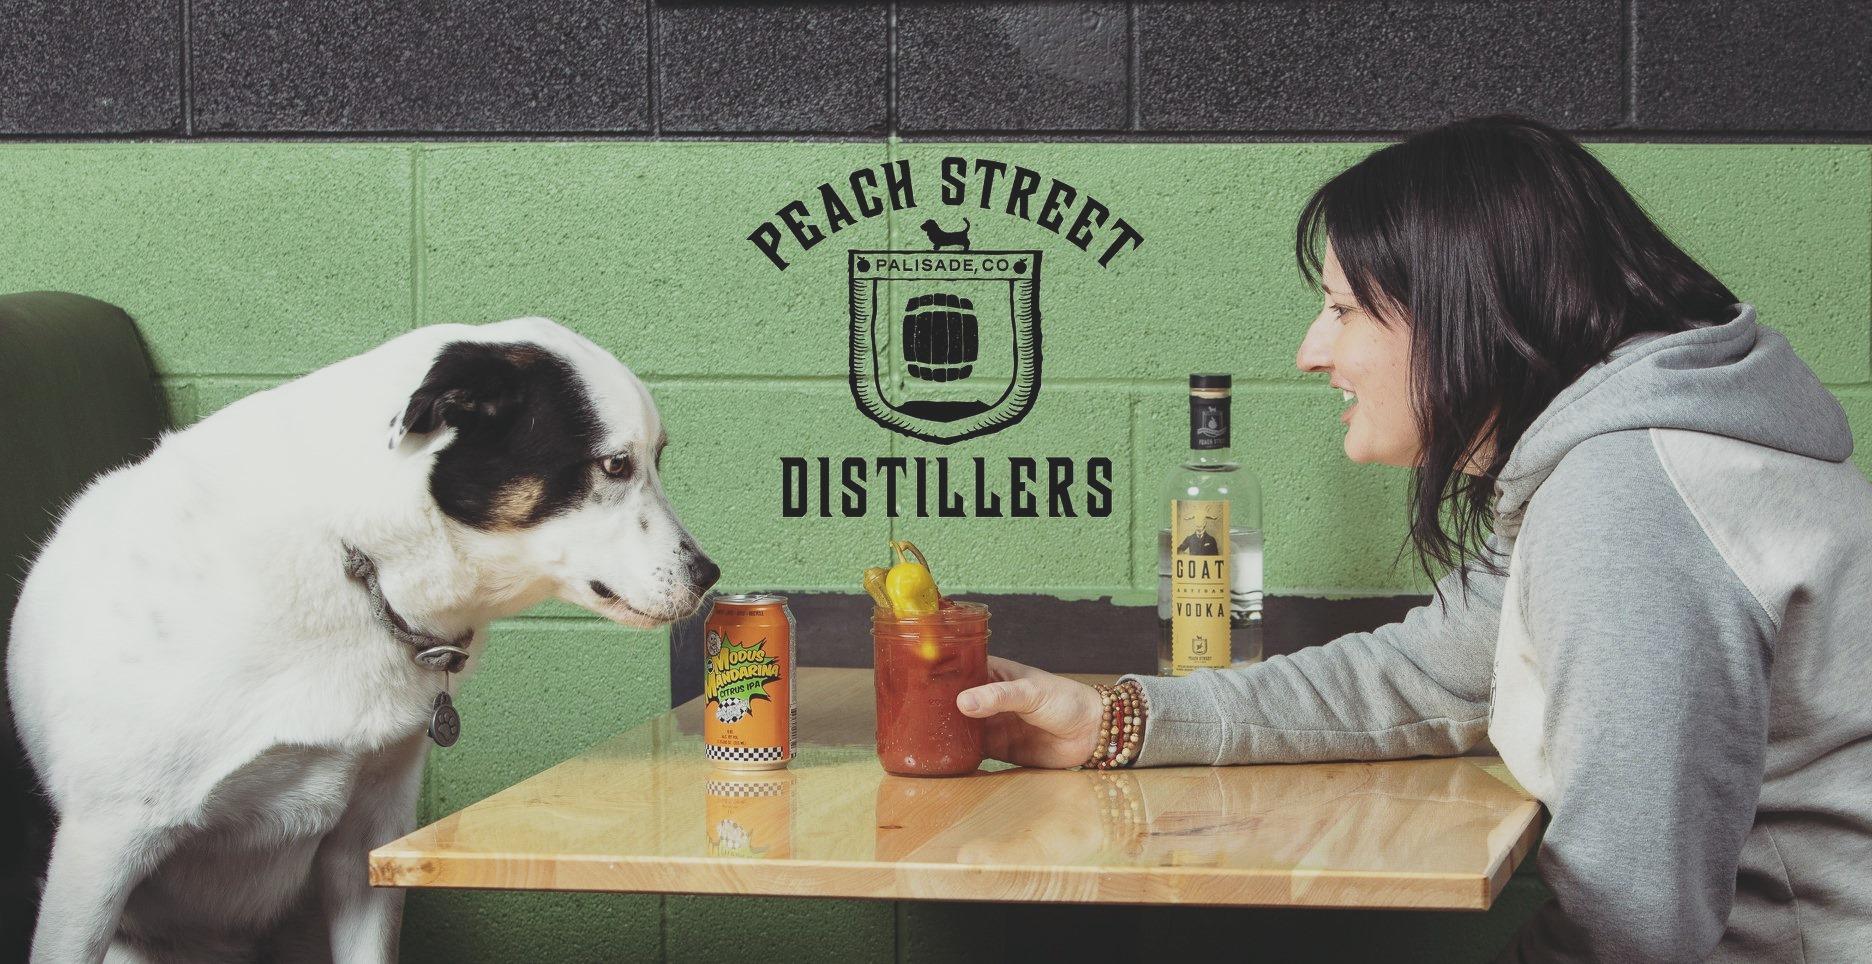 Peach Street Distillers - All You Need to Know BEFORE You Go (with Photos)